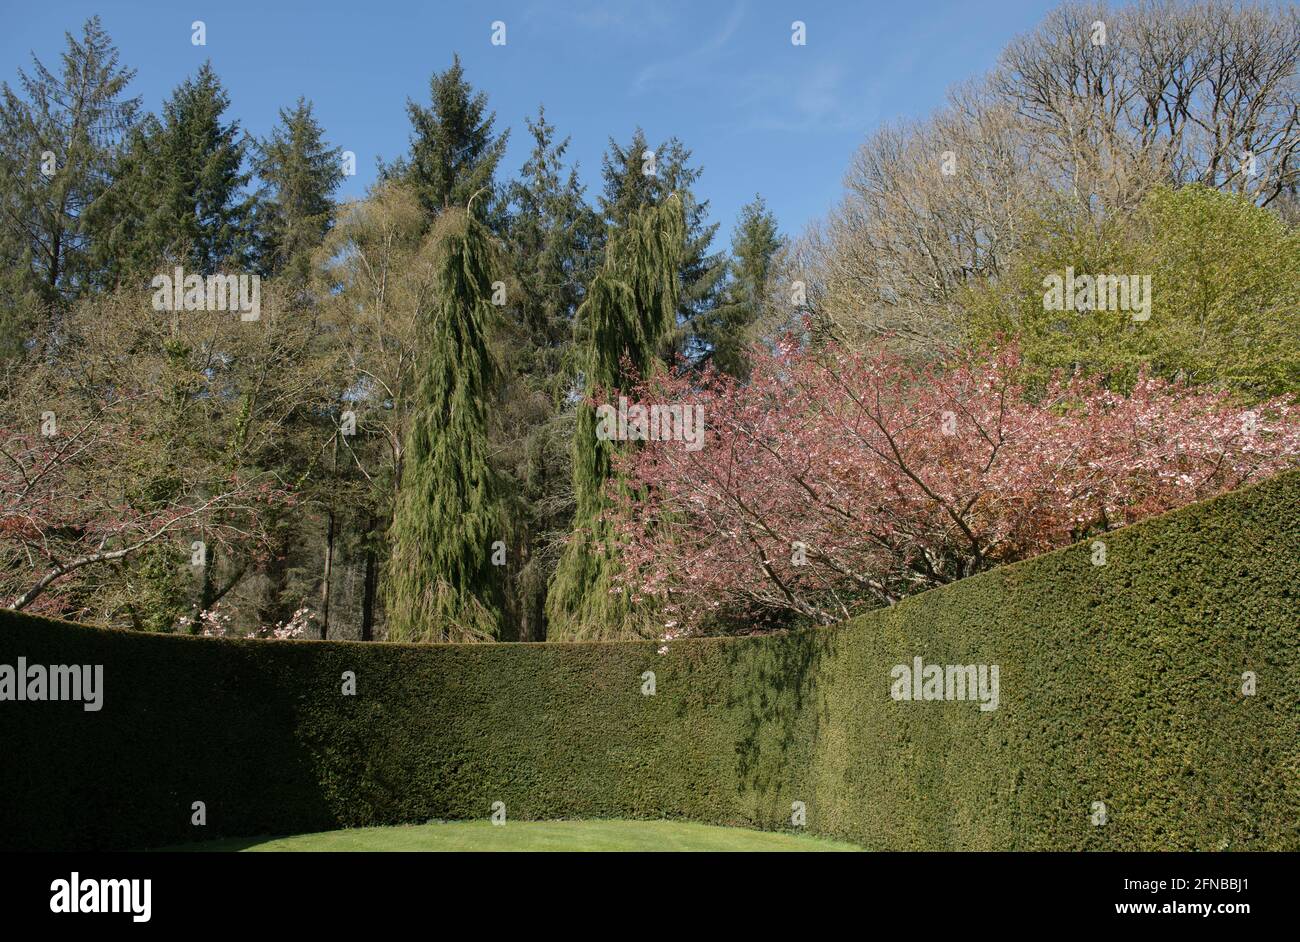 Ornamental Spring Garden with a Pink Flowering Cherry Tree Overhanging a Yew Hedge and a Bright Blue Sky Background at Rosemoor in Rural Devon, Englan Stock Photo